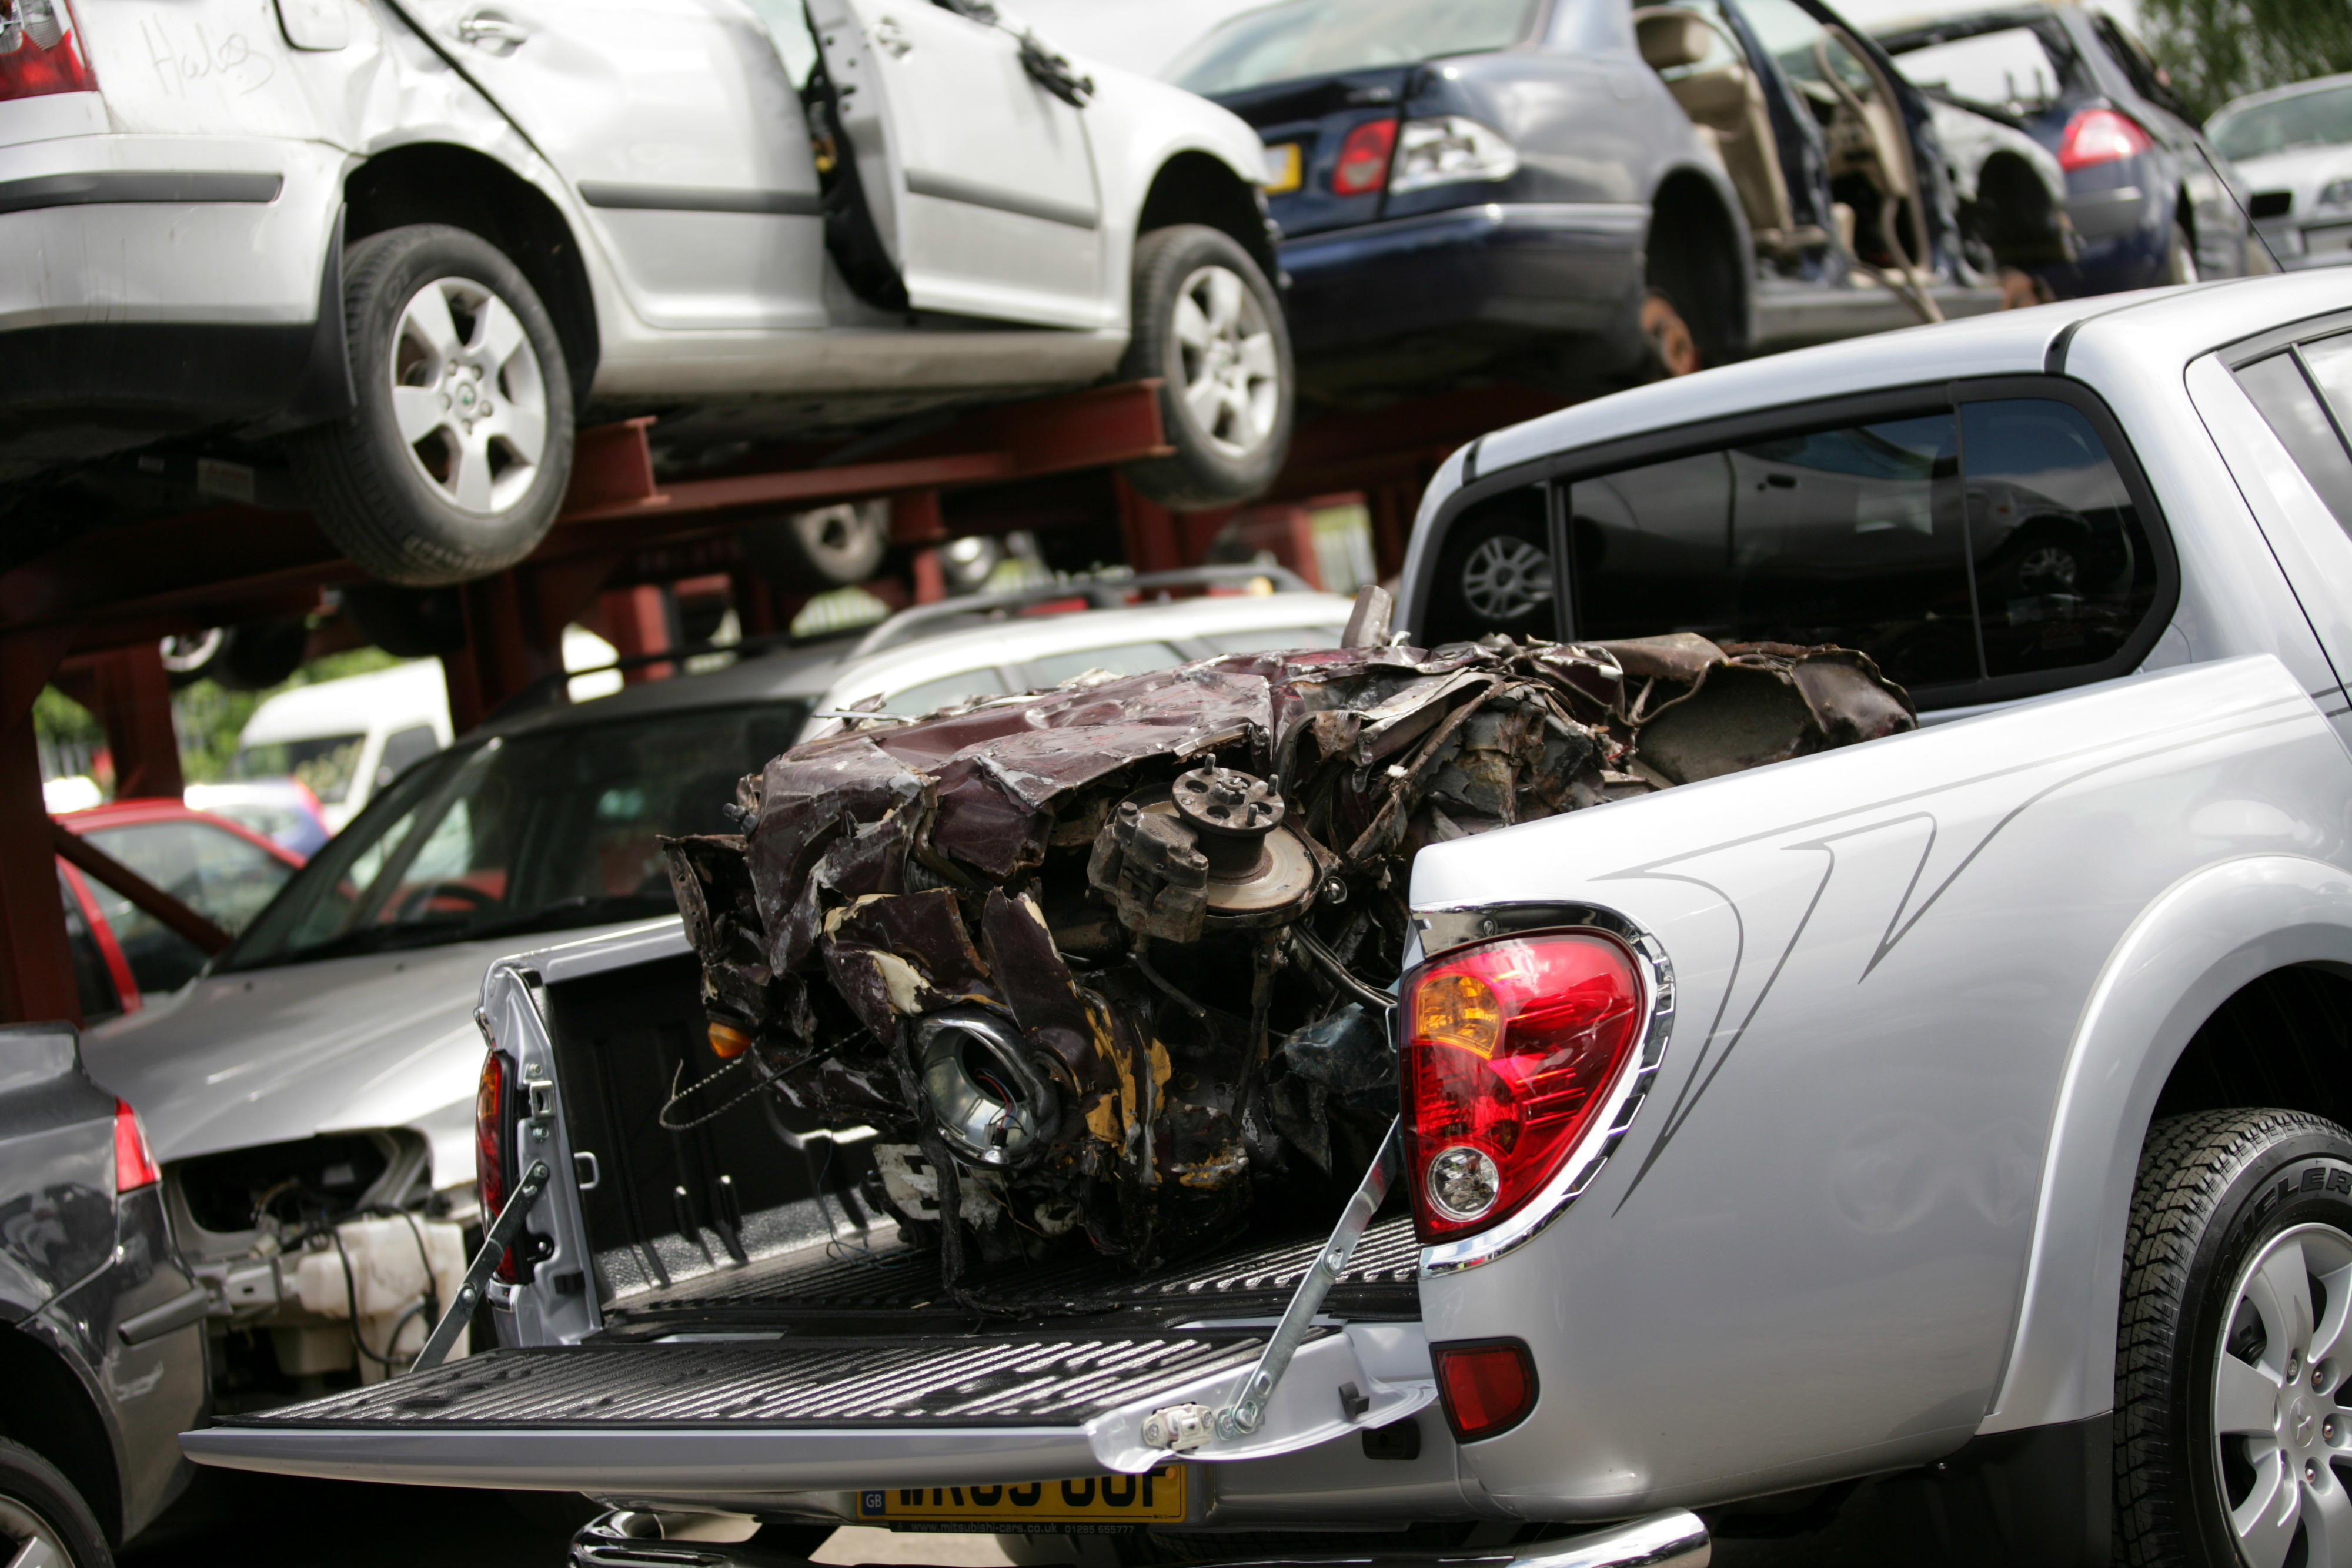 Scrapped cars are no longer crushed